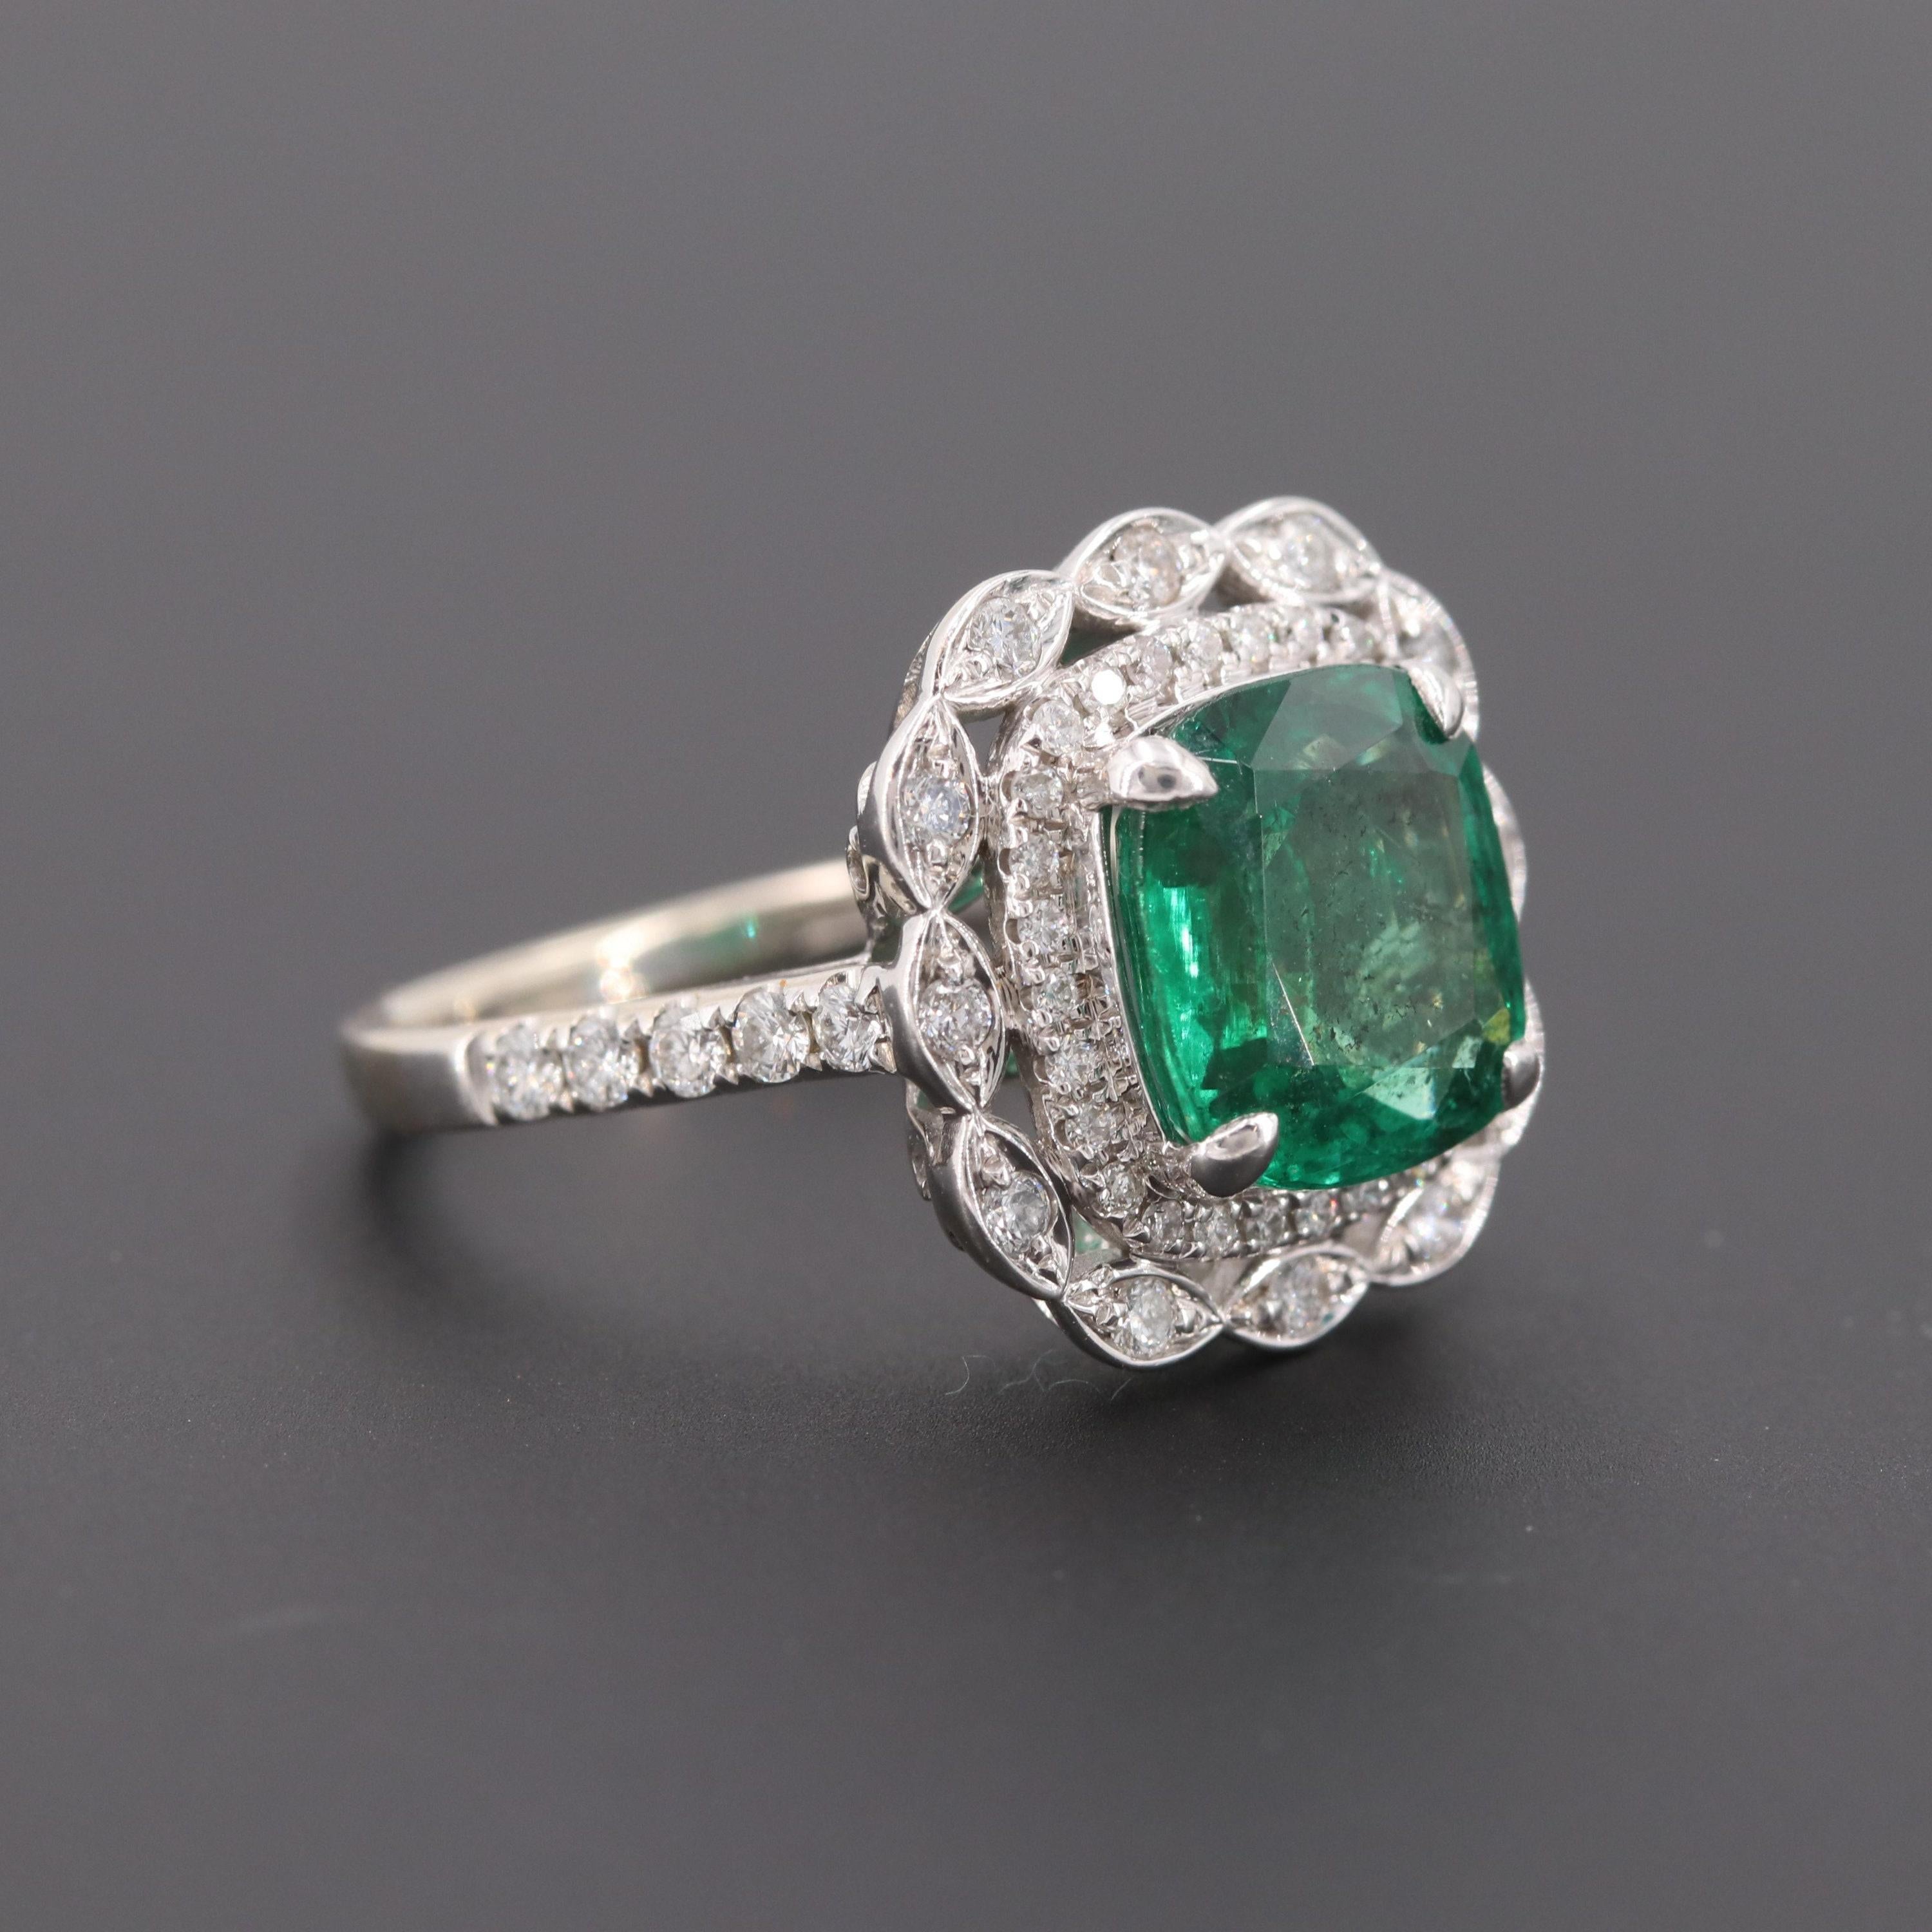 For Sale:  Art Deco 2 CT Natural Cushion Cut Emerald Engagement Ring, Diamond Cocktail Ring 2